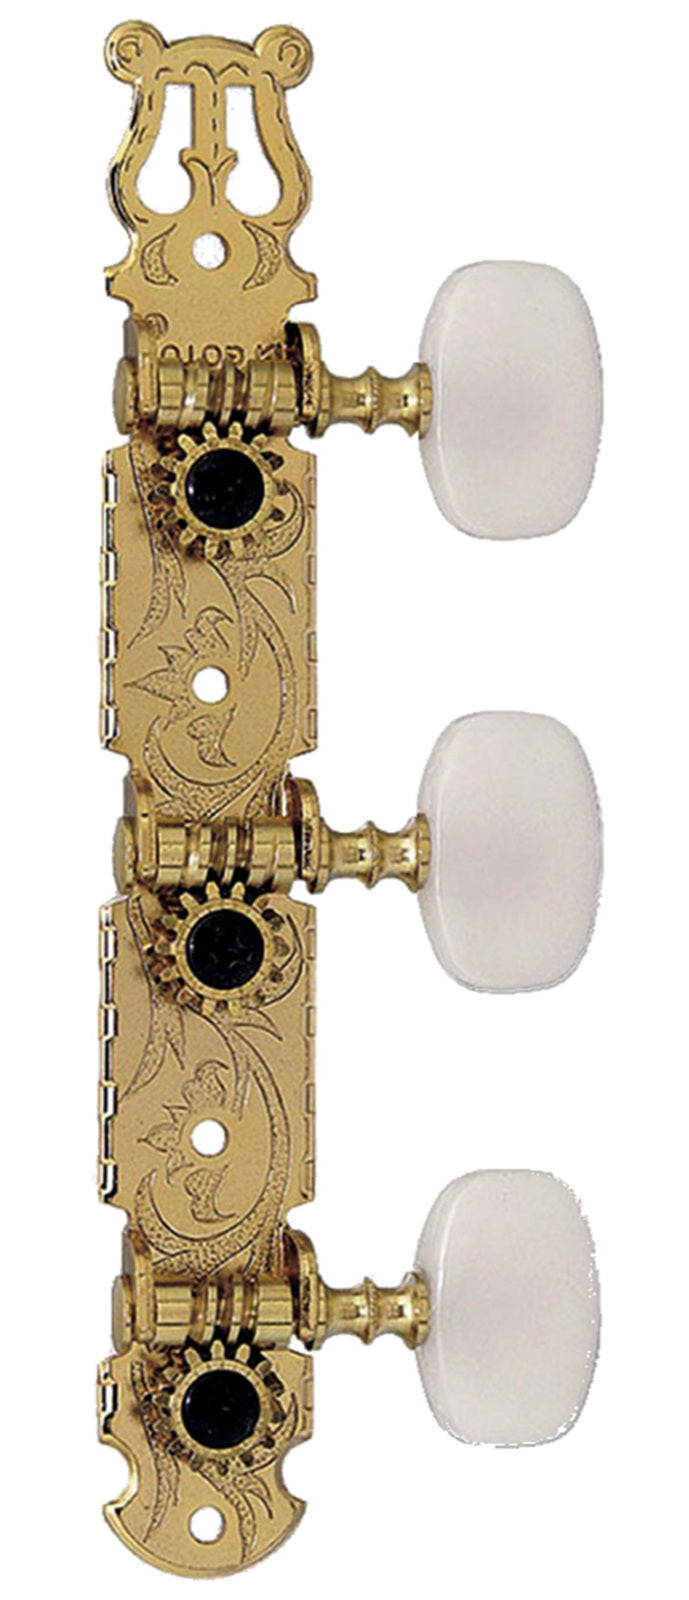 Gotoh 35G450 Classical Guitar Tuning Machines on Decorative Plate in Flash Gold Finish (3+3)